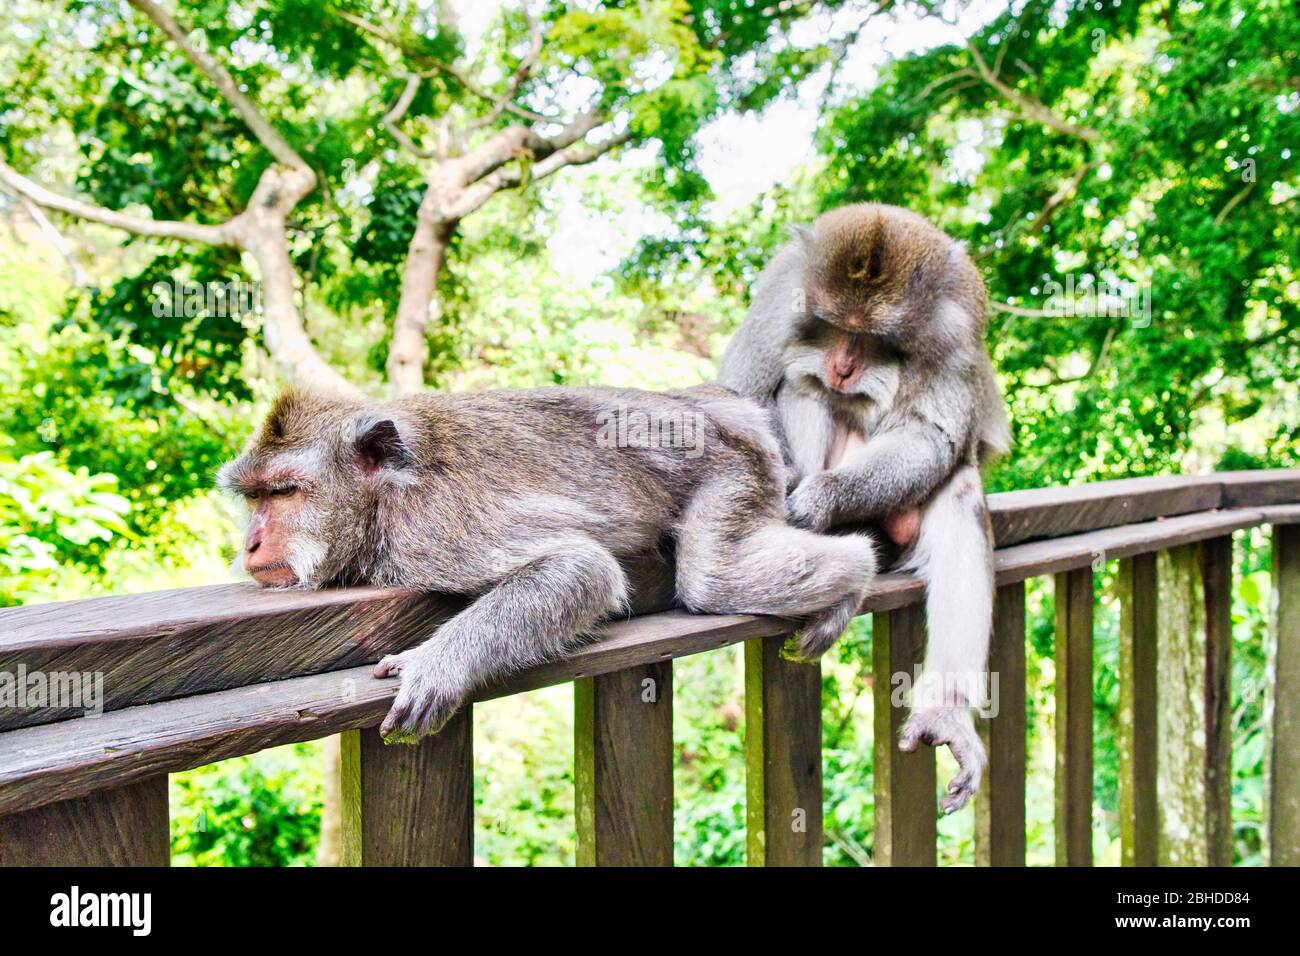 Macaque monkeys and statues at Ubud Bali, Indonesia. Sacred Monkey Forest and Hindu temple complex in Ubud. Stock Photo